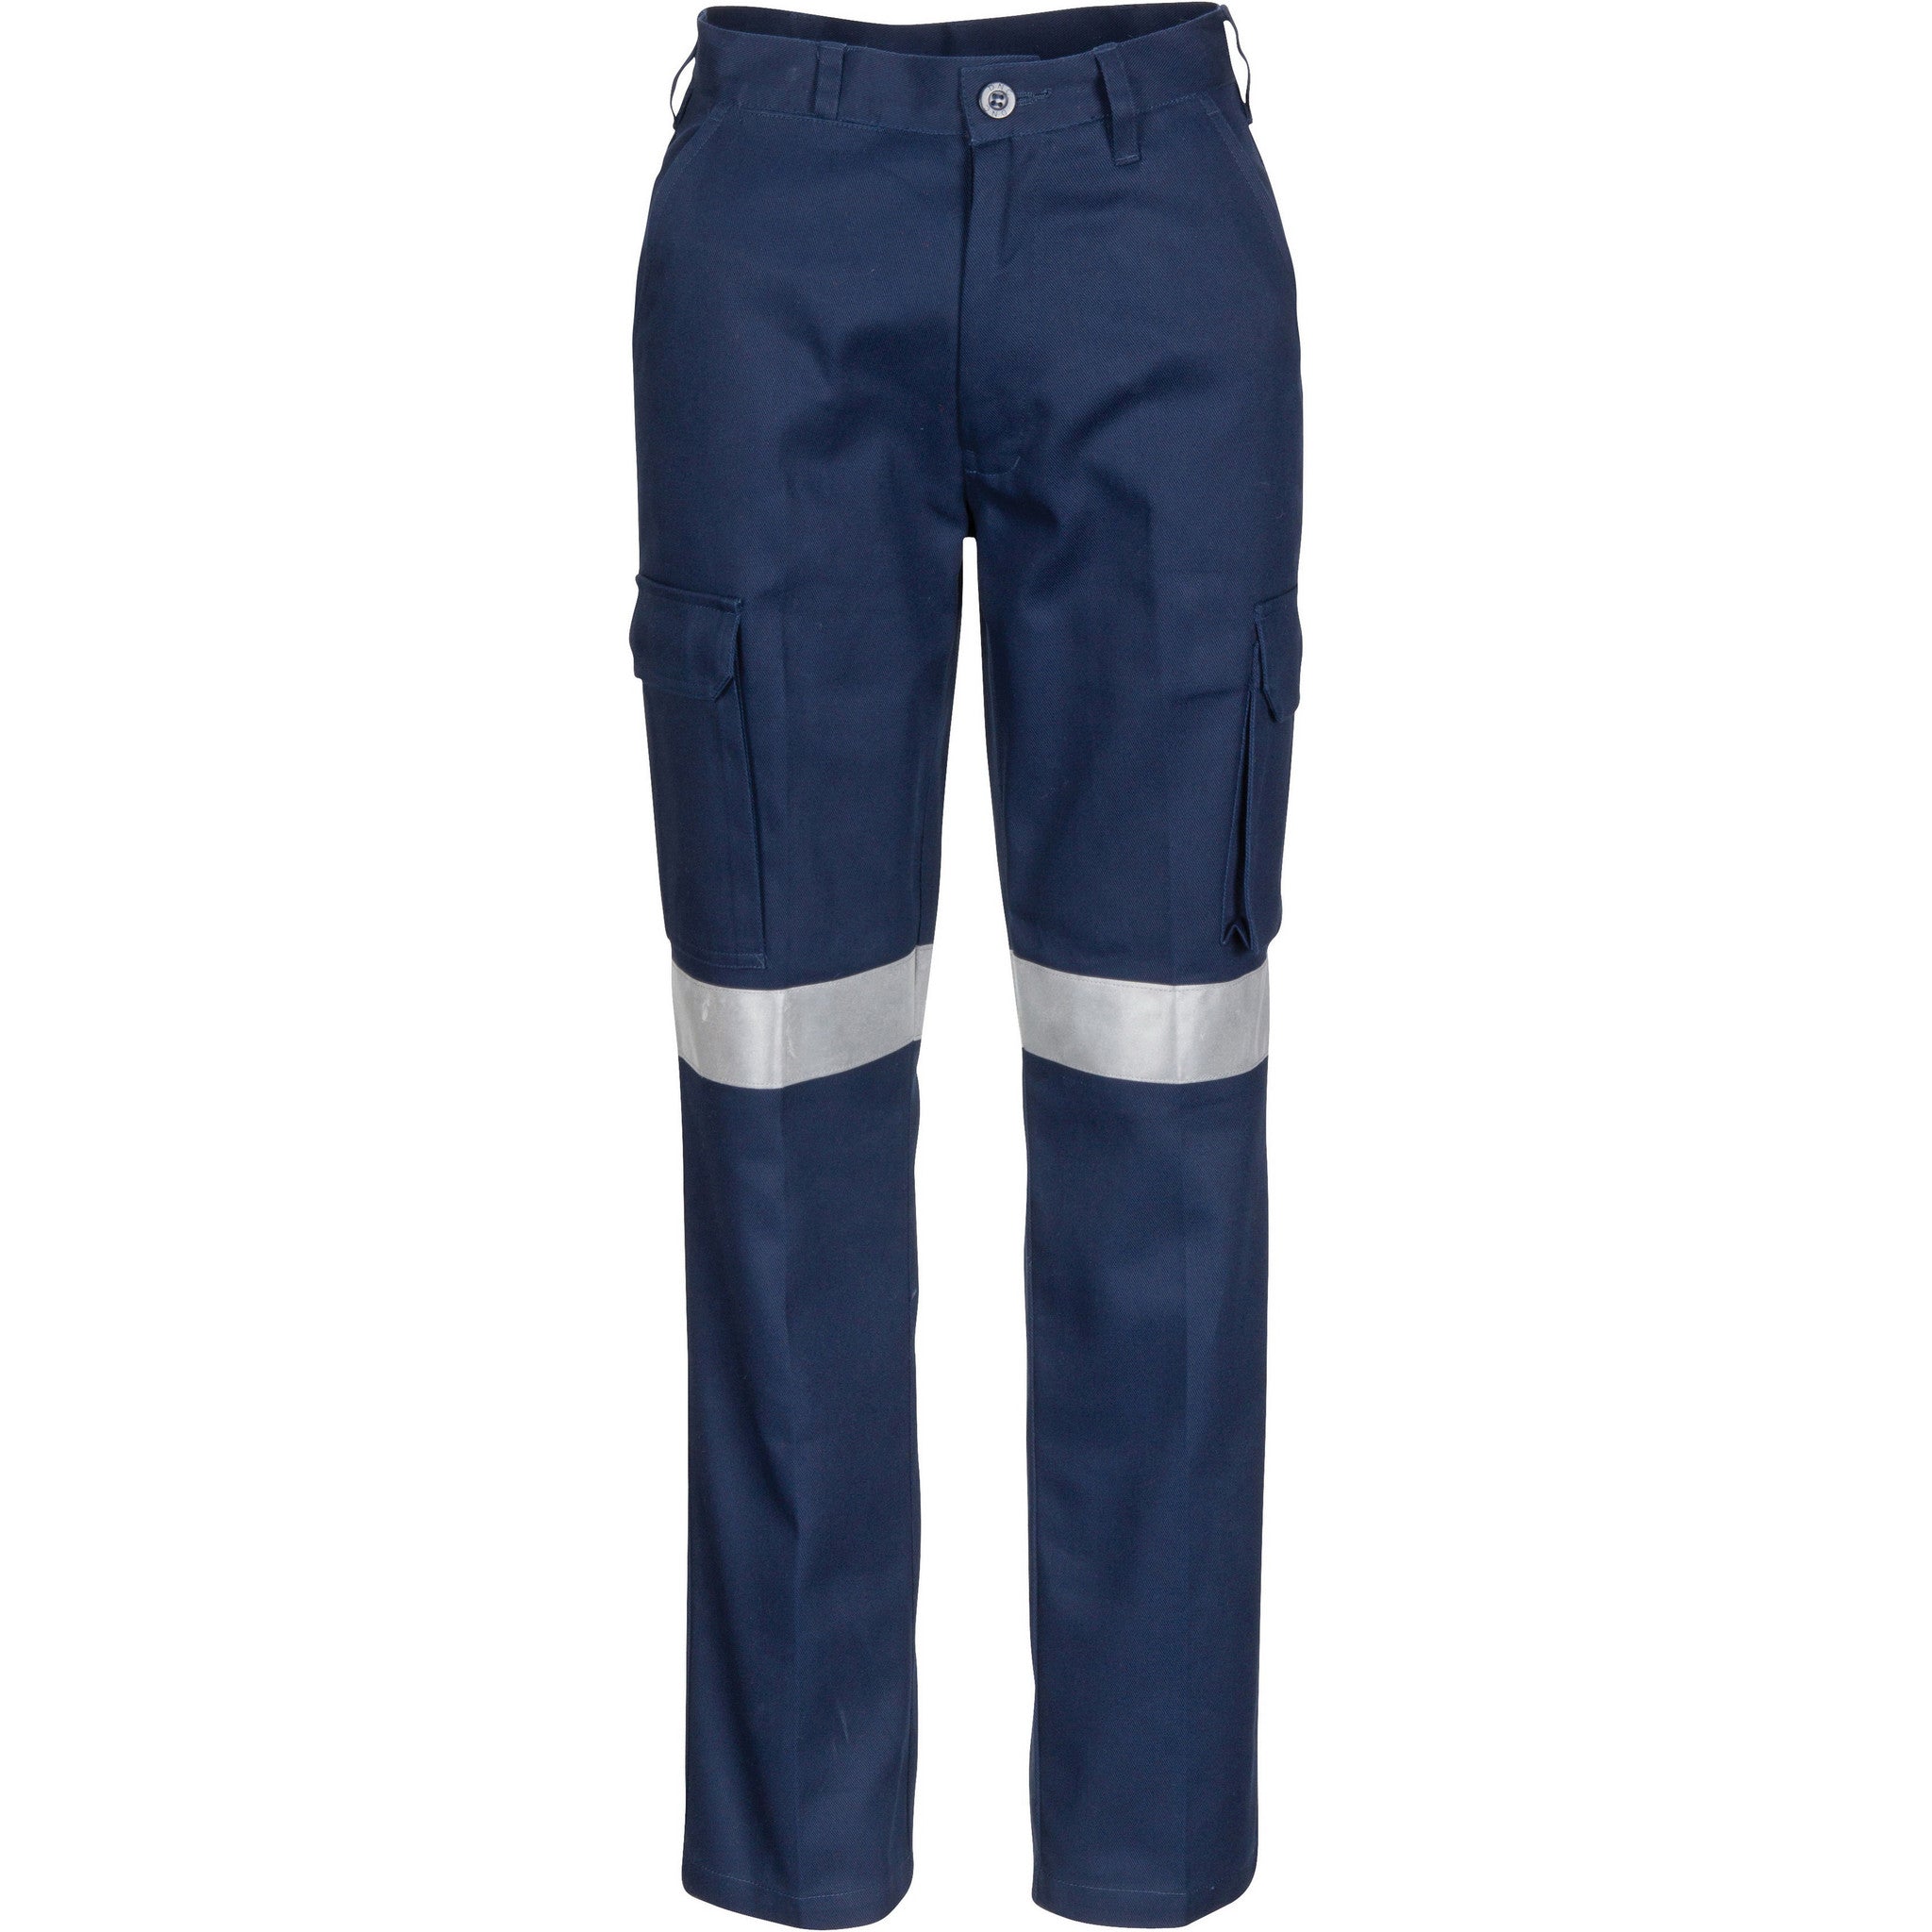 DNC Ladies Cotton Drill Cargo Pants with 3M Reflective Tape (3323)